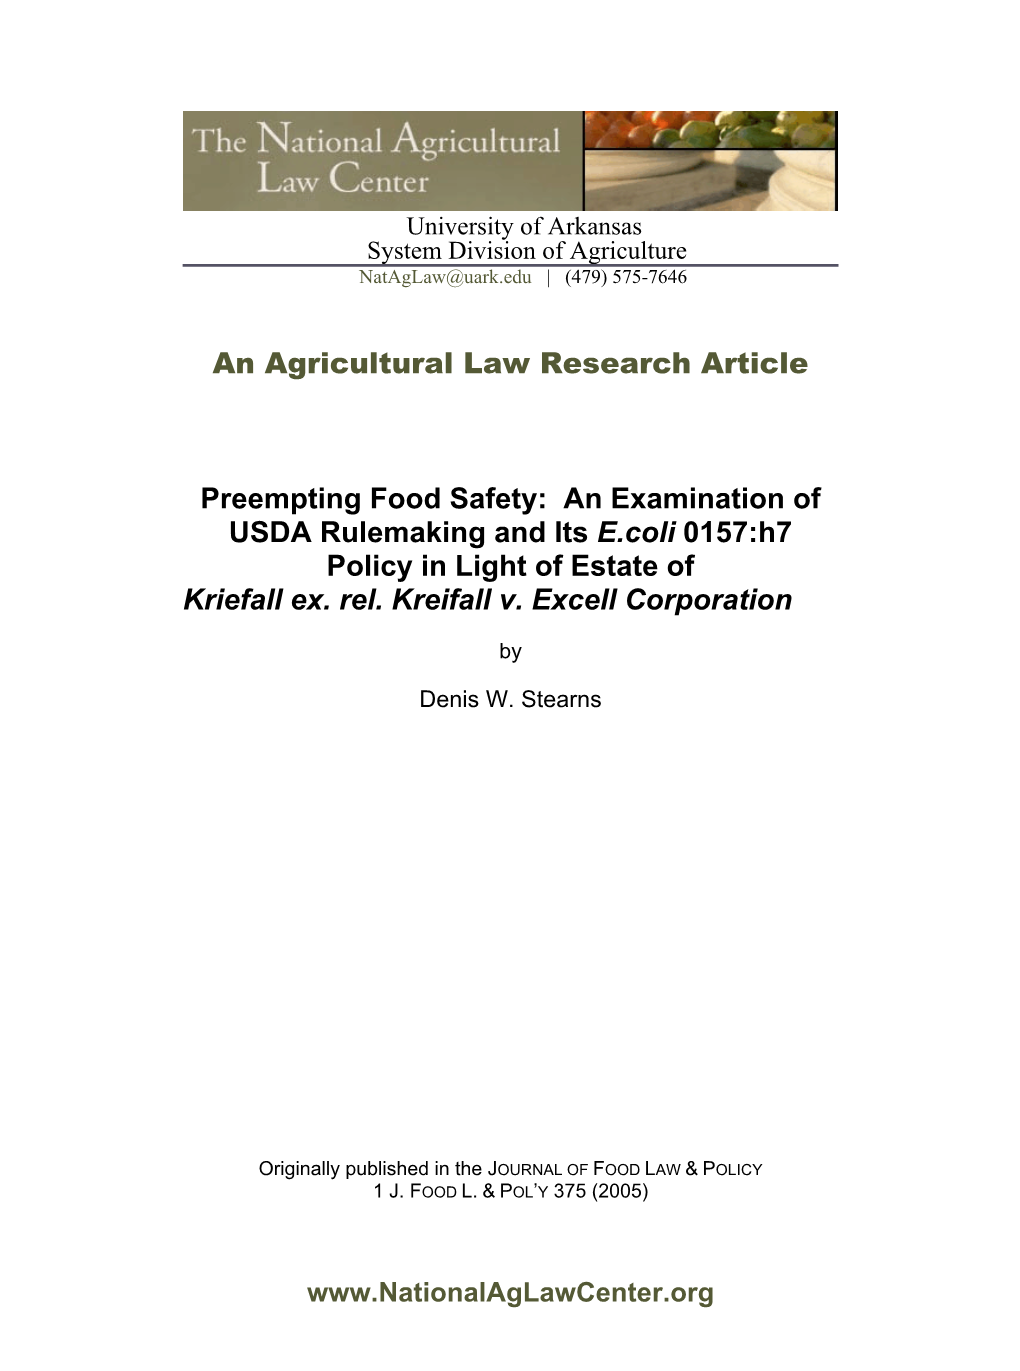 An Agricultural Law Research Article Preempting Food Safety: an Examination of USDA Rulemaking and Its E.Coli 0157:H7 Policy In